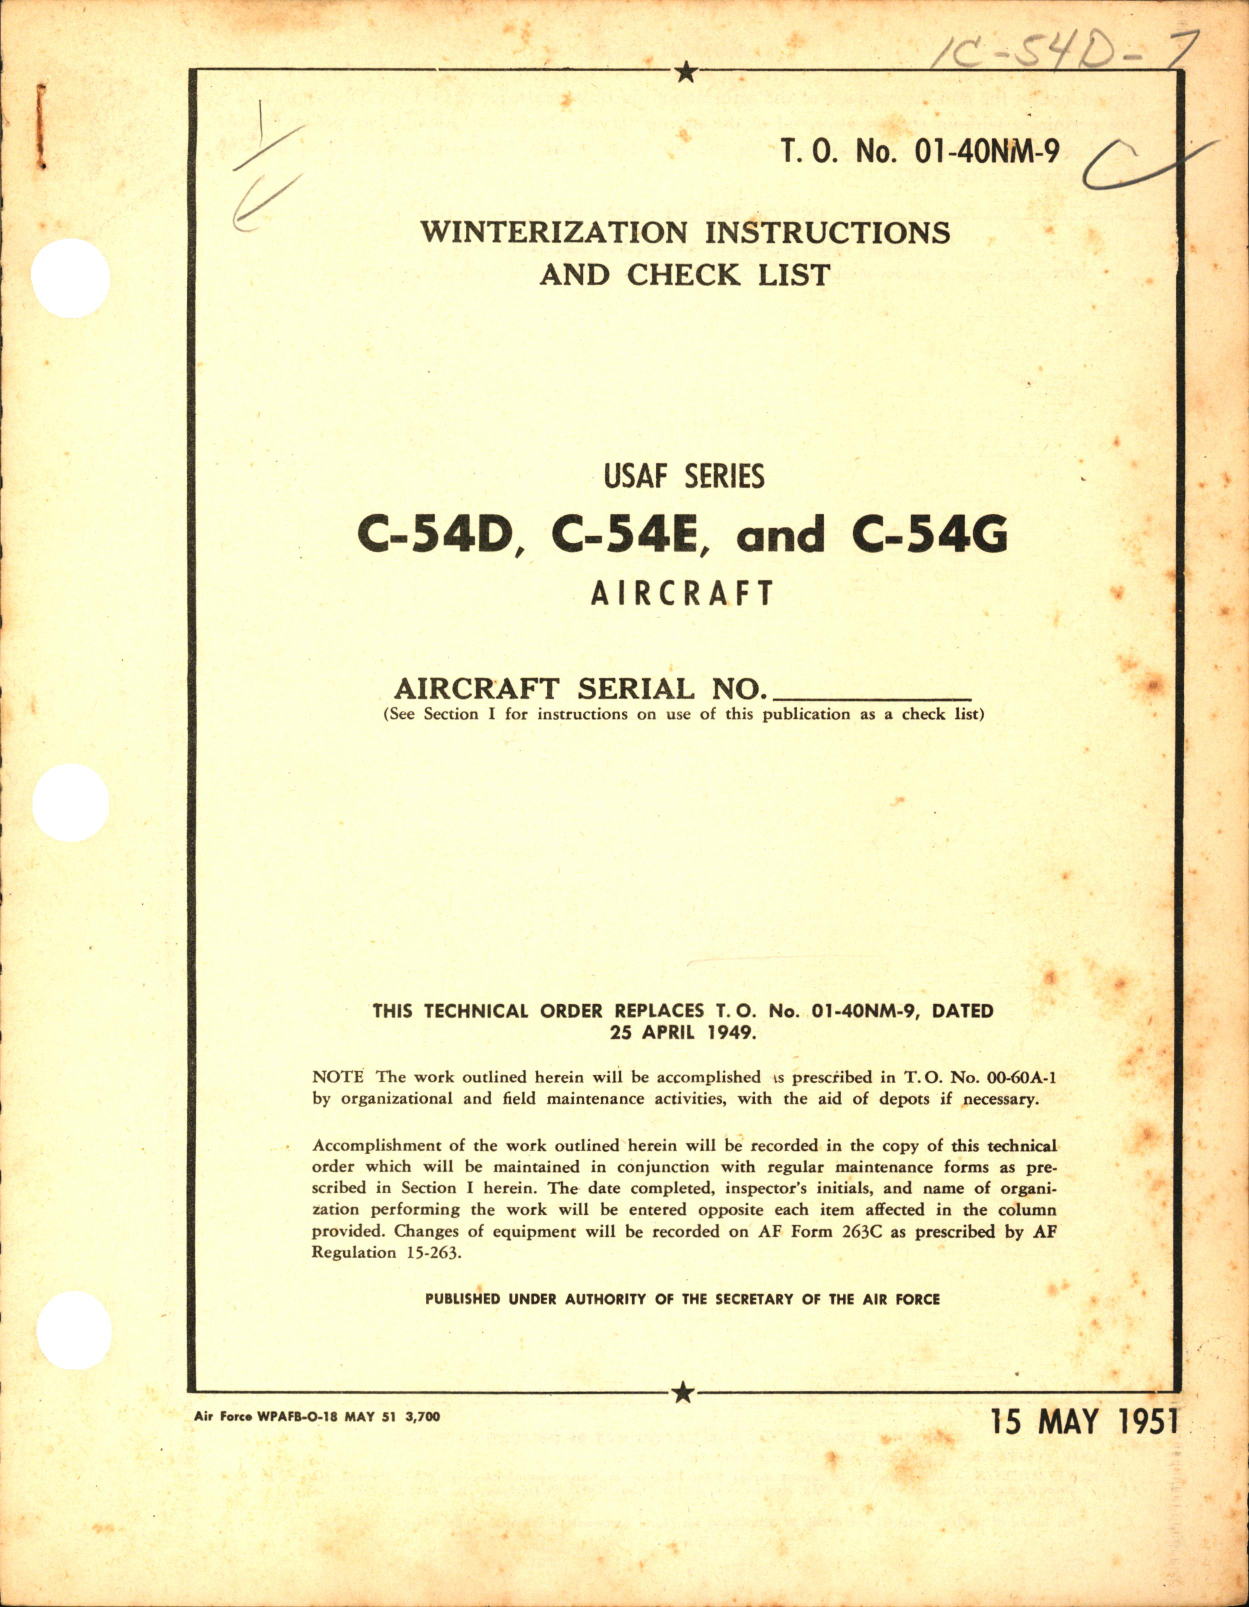 Sample page 1 from AirCorps Library document: Winterization Instructions and Check List for C-54D, E, and G Aircraft